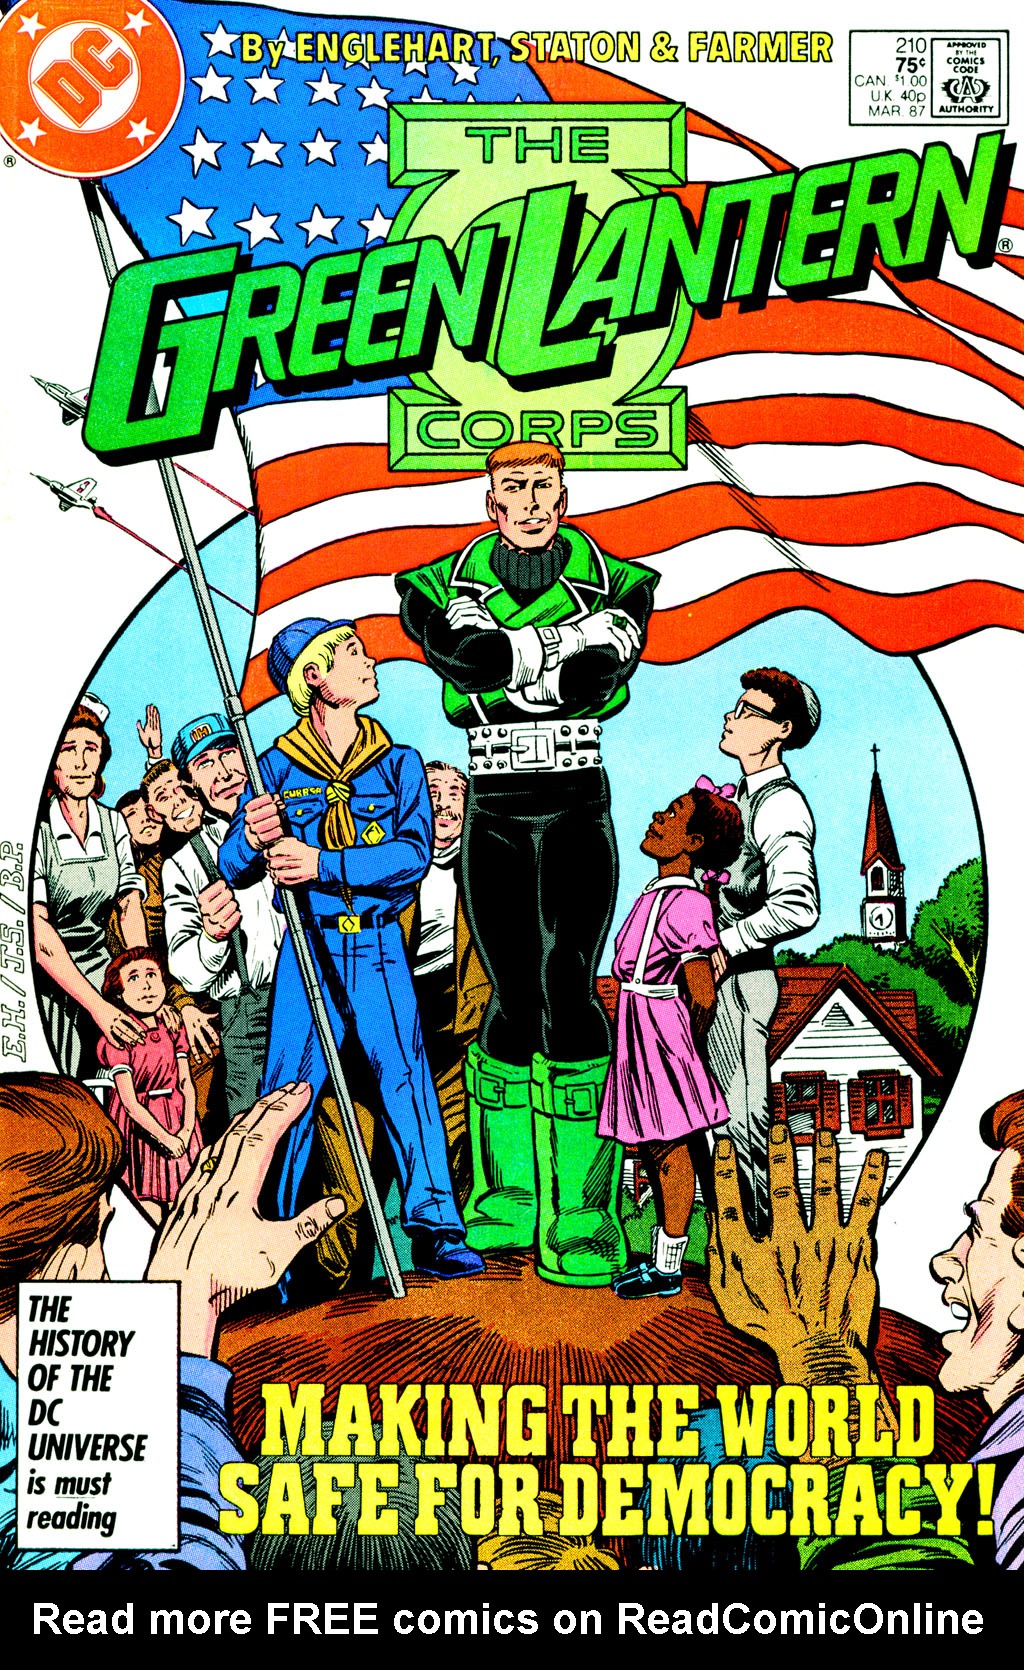 Read online The Green Lantern Corps comic -  Issue #210 - 1